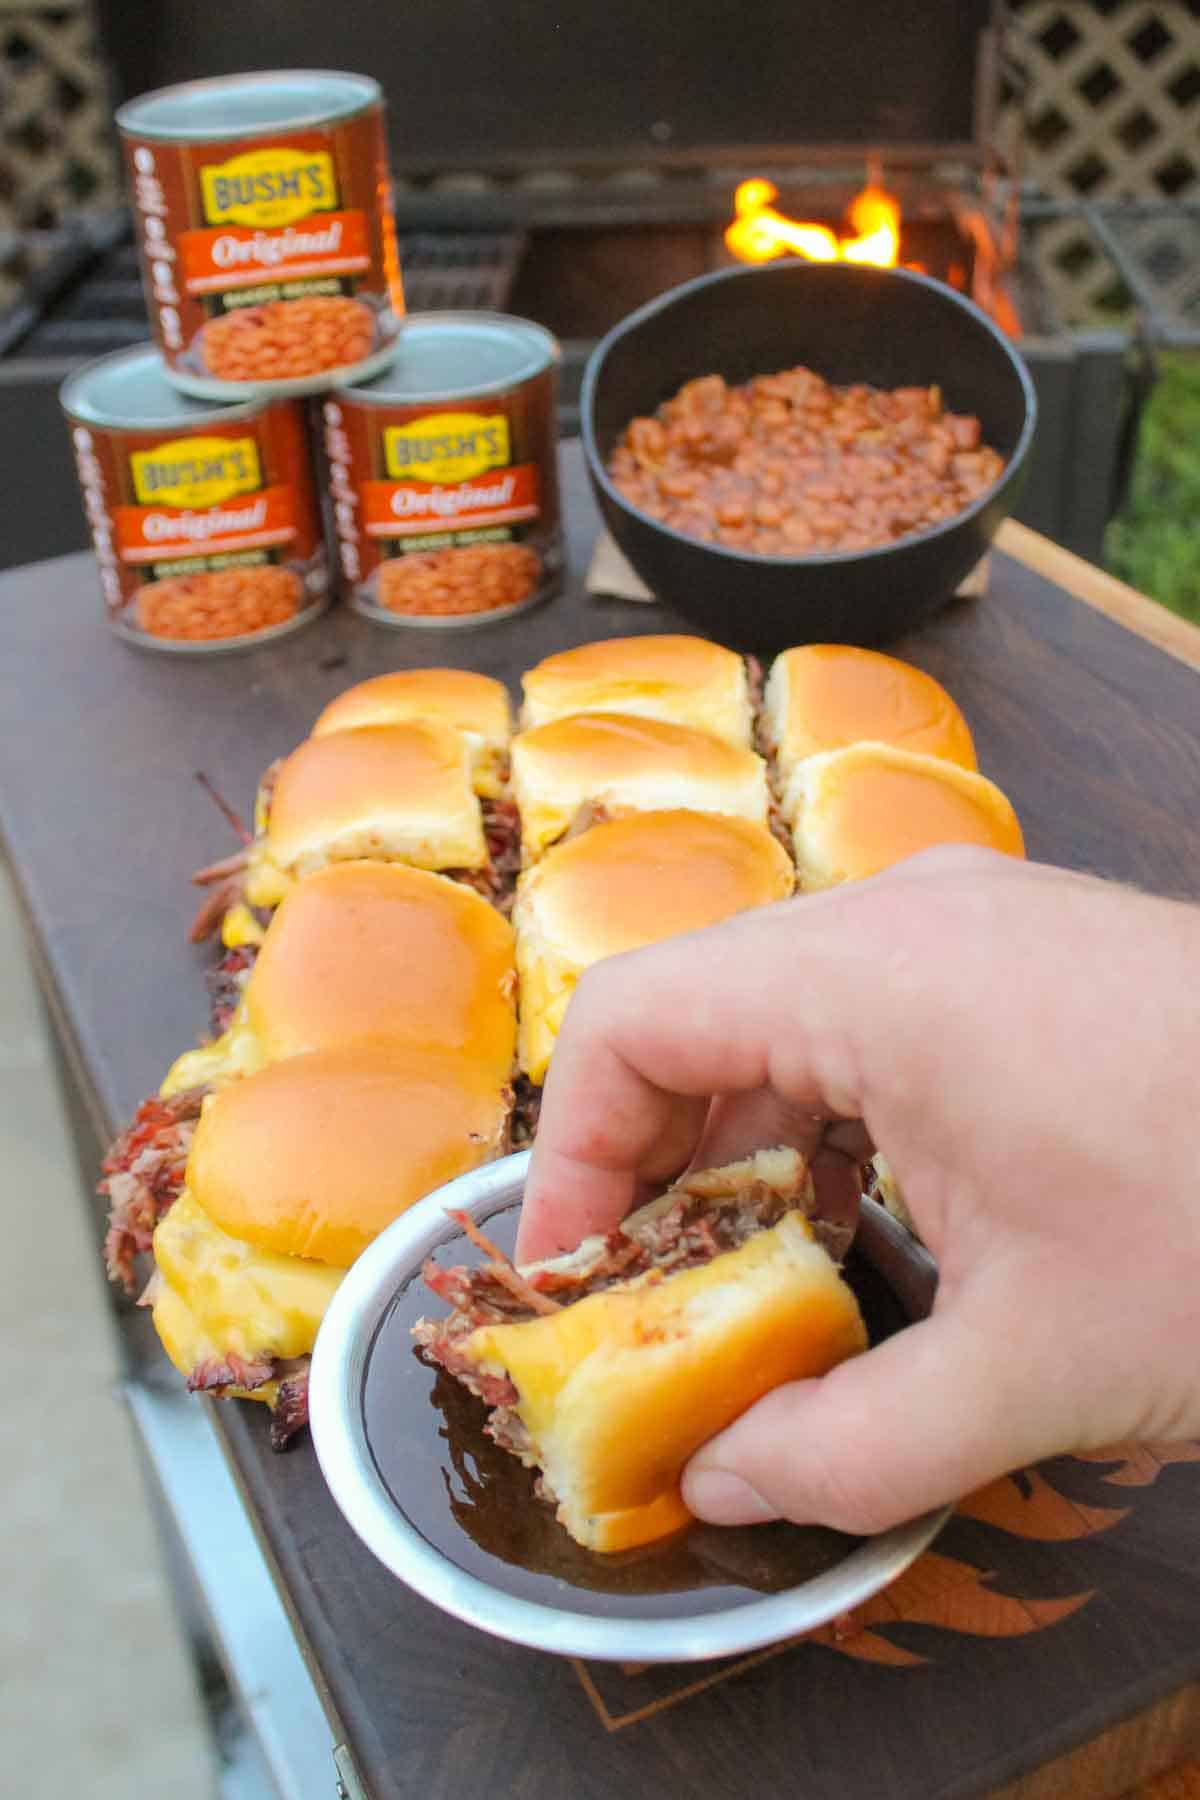 Dipping the slider in the au jus with the baked beans in the background.